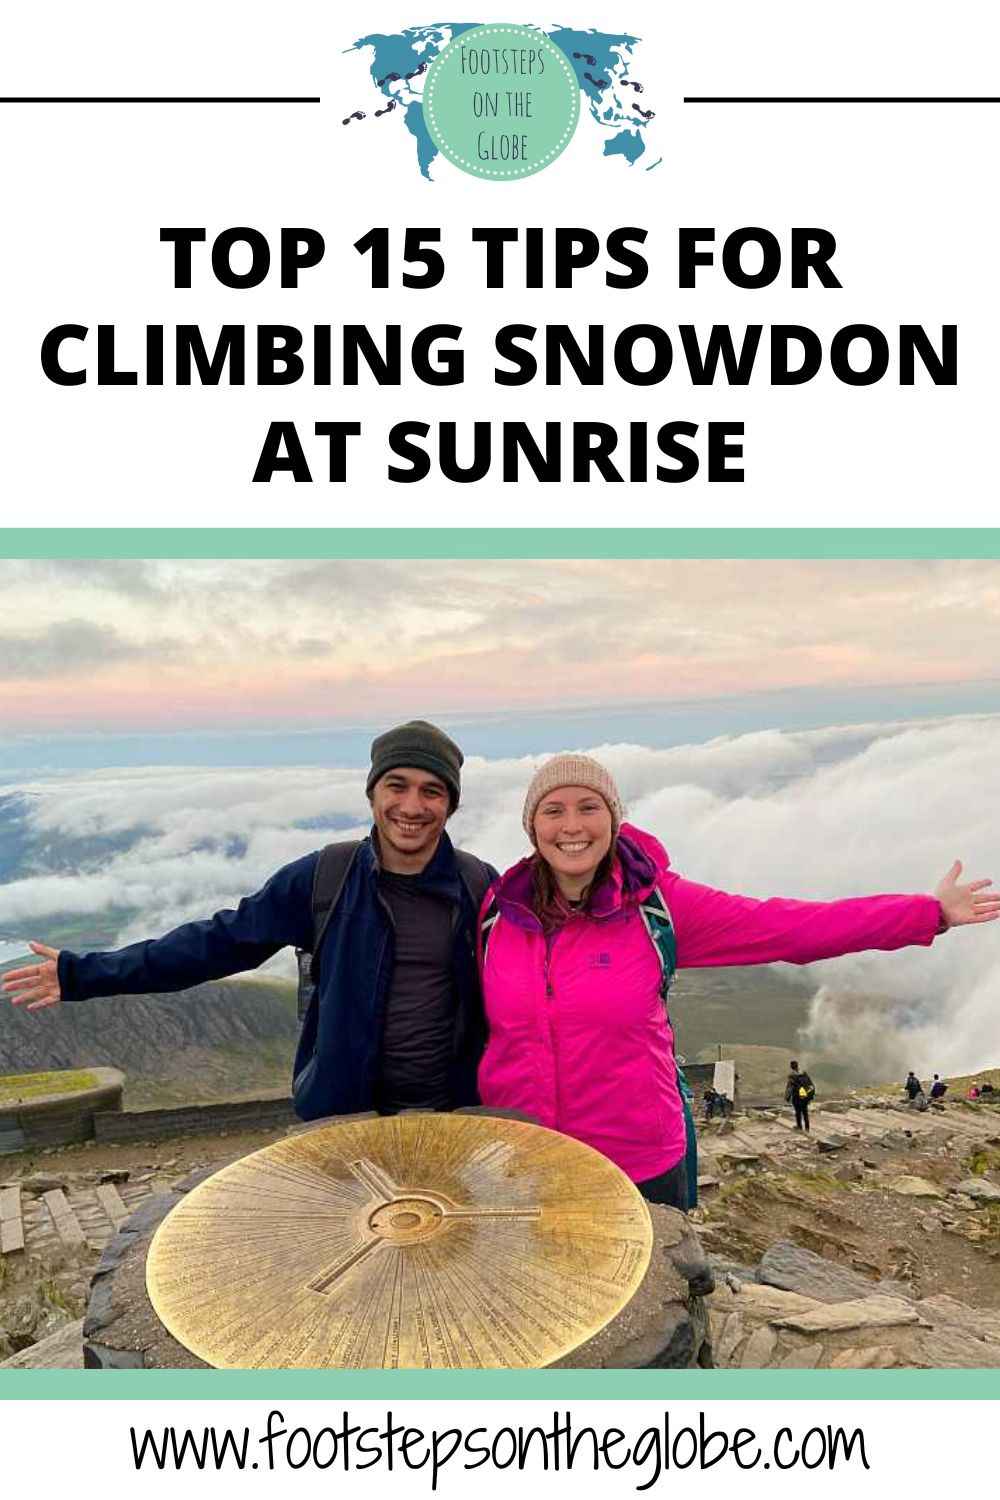 Mel and Joe holding out their arms at the summit of Snowdon at sunrise in front of the summit marker with the text: "Top 15 tips for climbing Snowdon at sunrise" Pinterest image